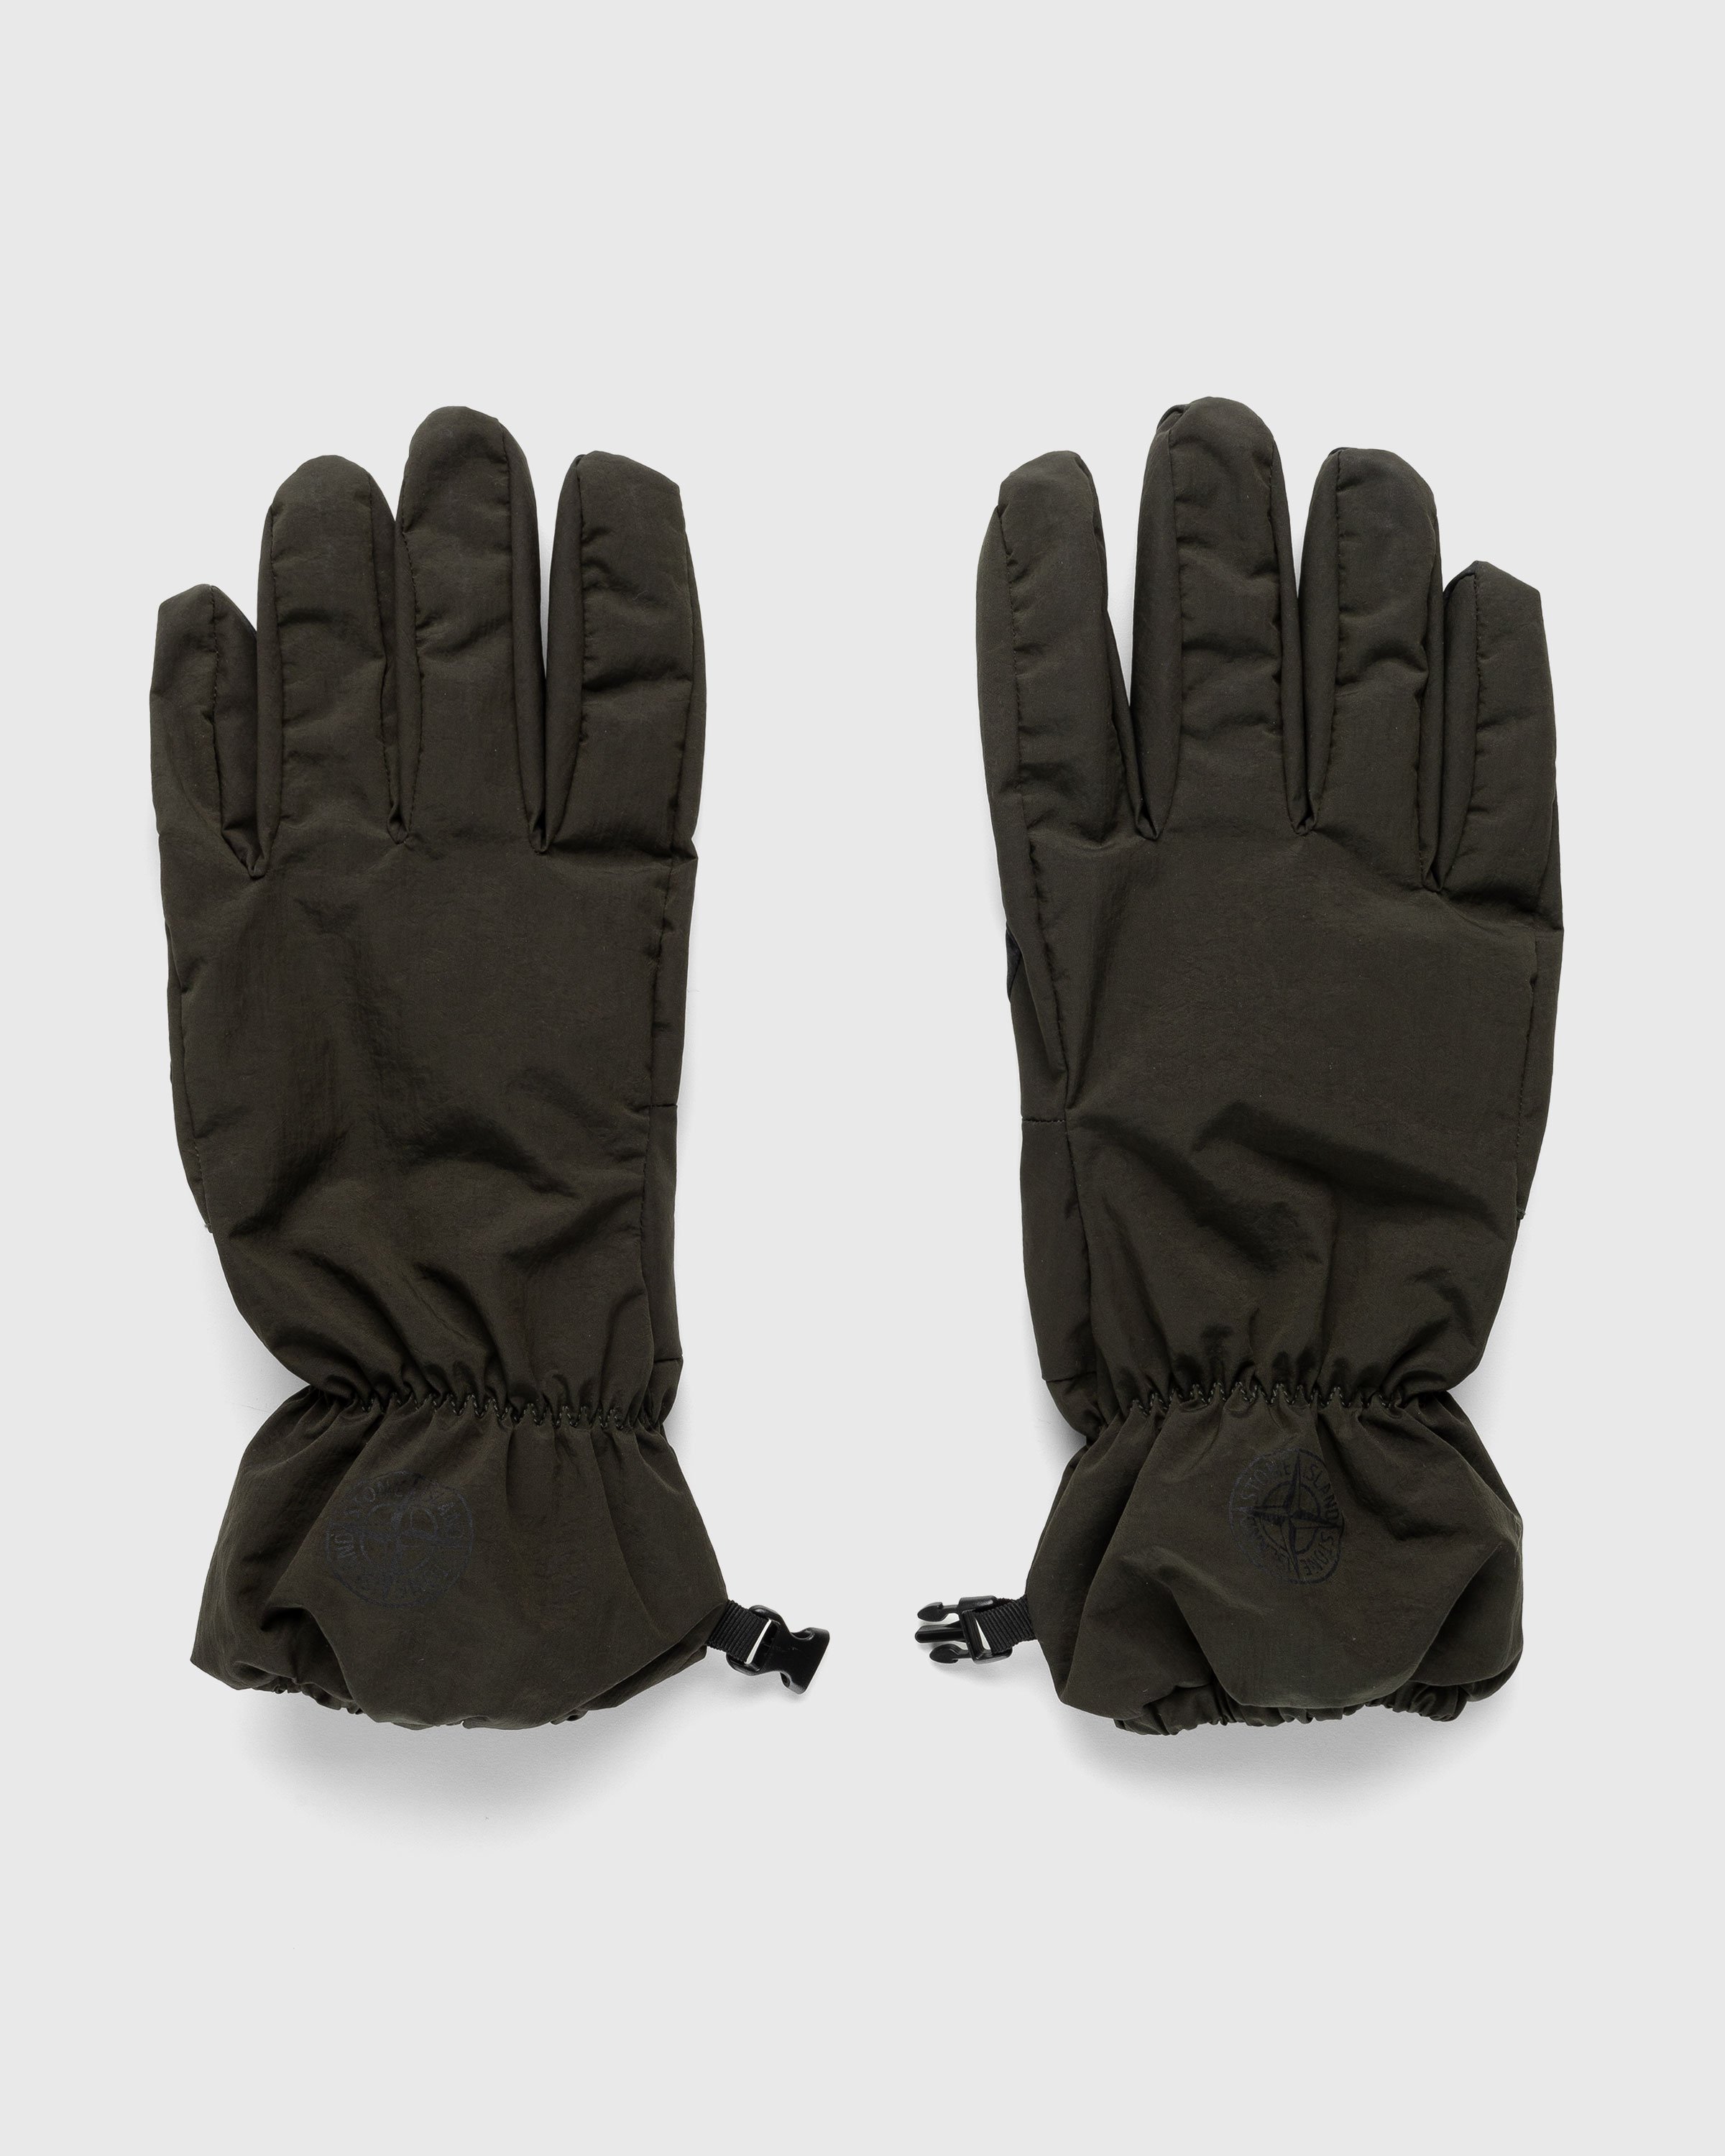 Stone Island - GLOVES Green 791592069 - Accessories - Green - Image 1